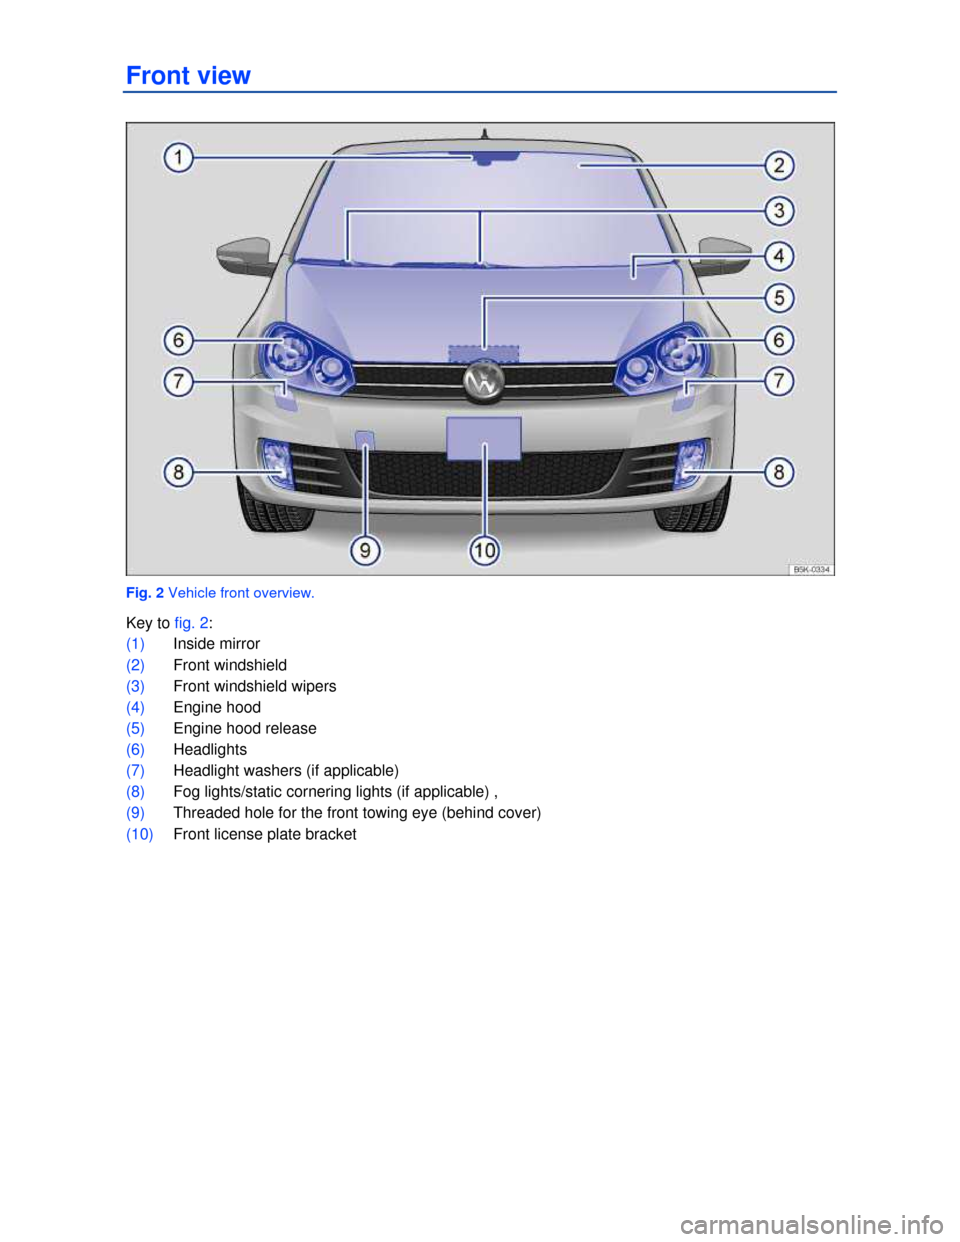 VOLKSWAGEN GOLF GTI 2013 5G / 7.G Owners Manual Front view 
 
Fig. 2 Vehicle front overview. 
Key to fig. 2: 
(1) Inside mirror  
(2) Front windshield 
(3) Front windshield wipers  
(4) Engine hood  
(5) Engine hood release  
(6) Headlights  
(7) H